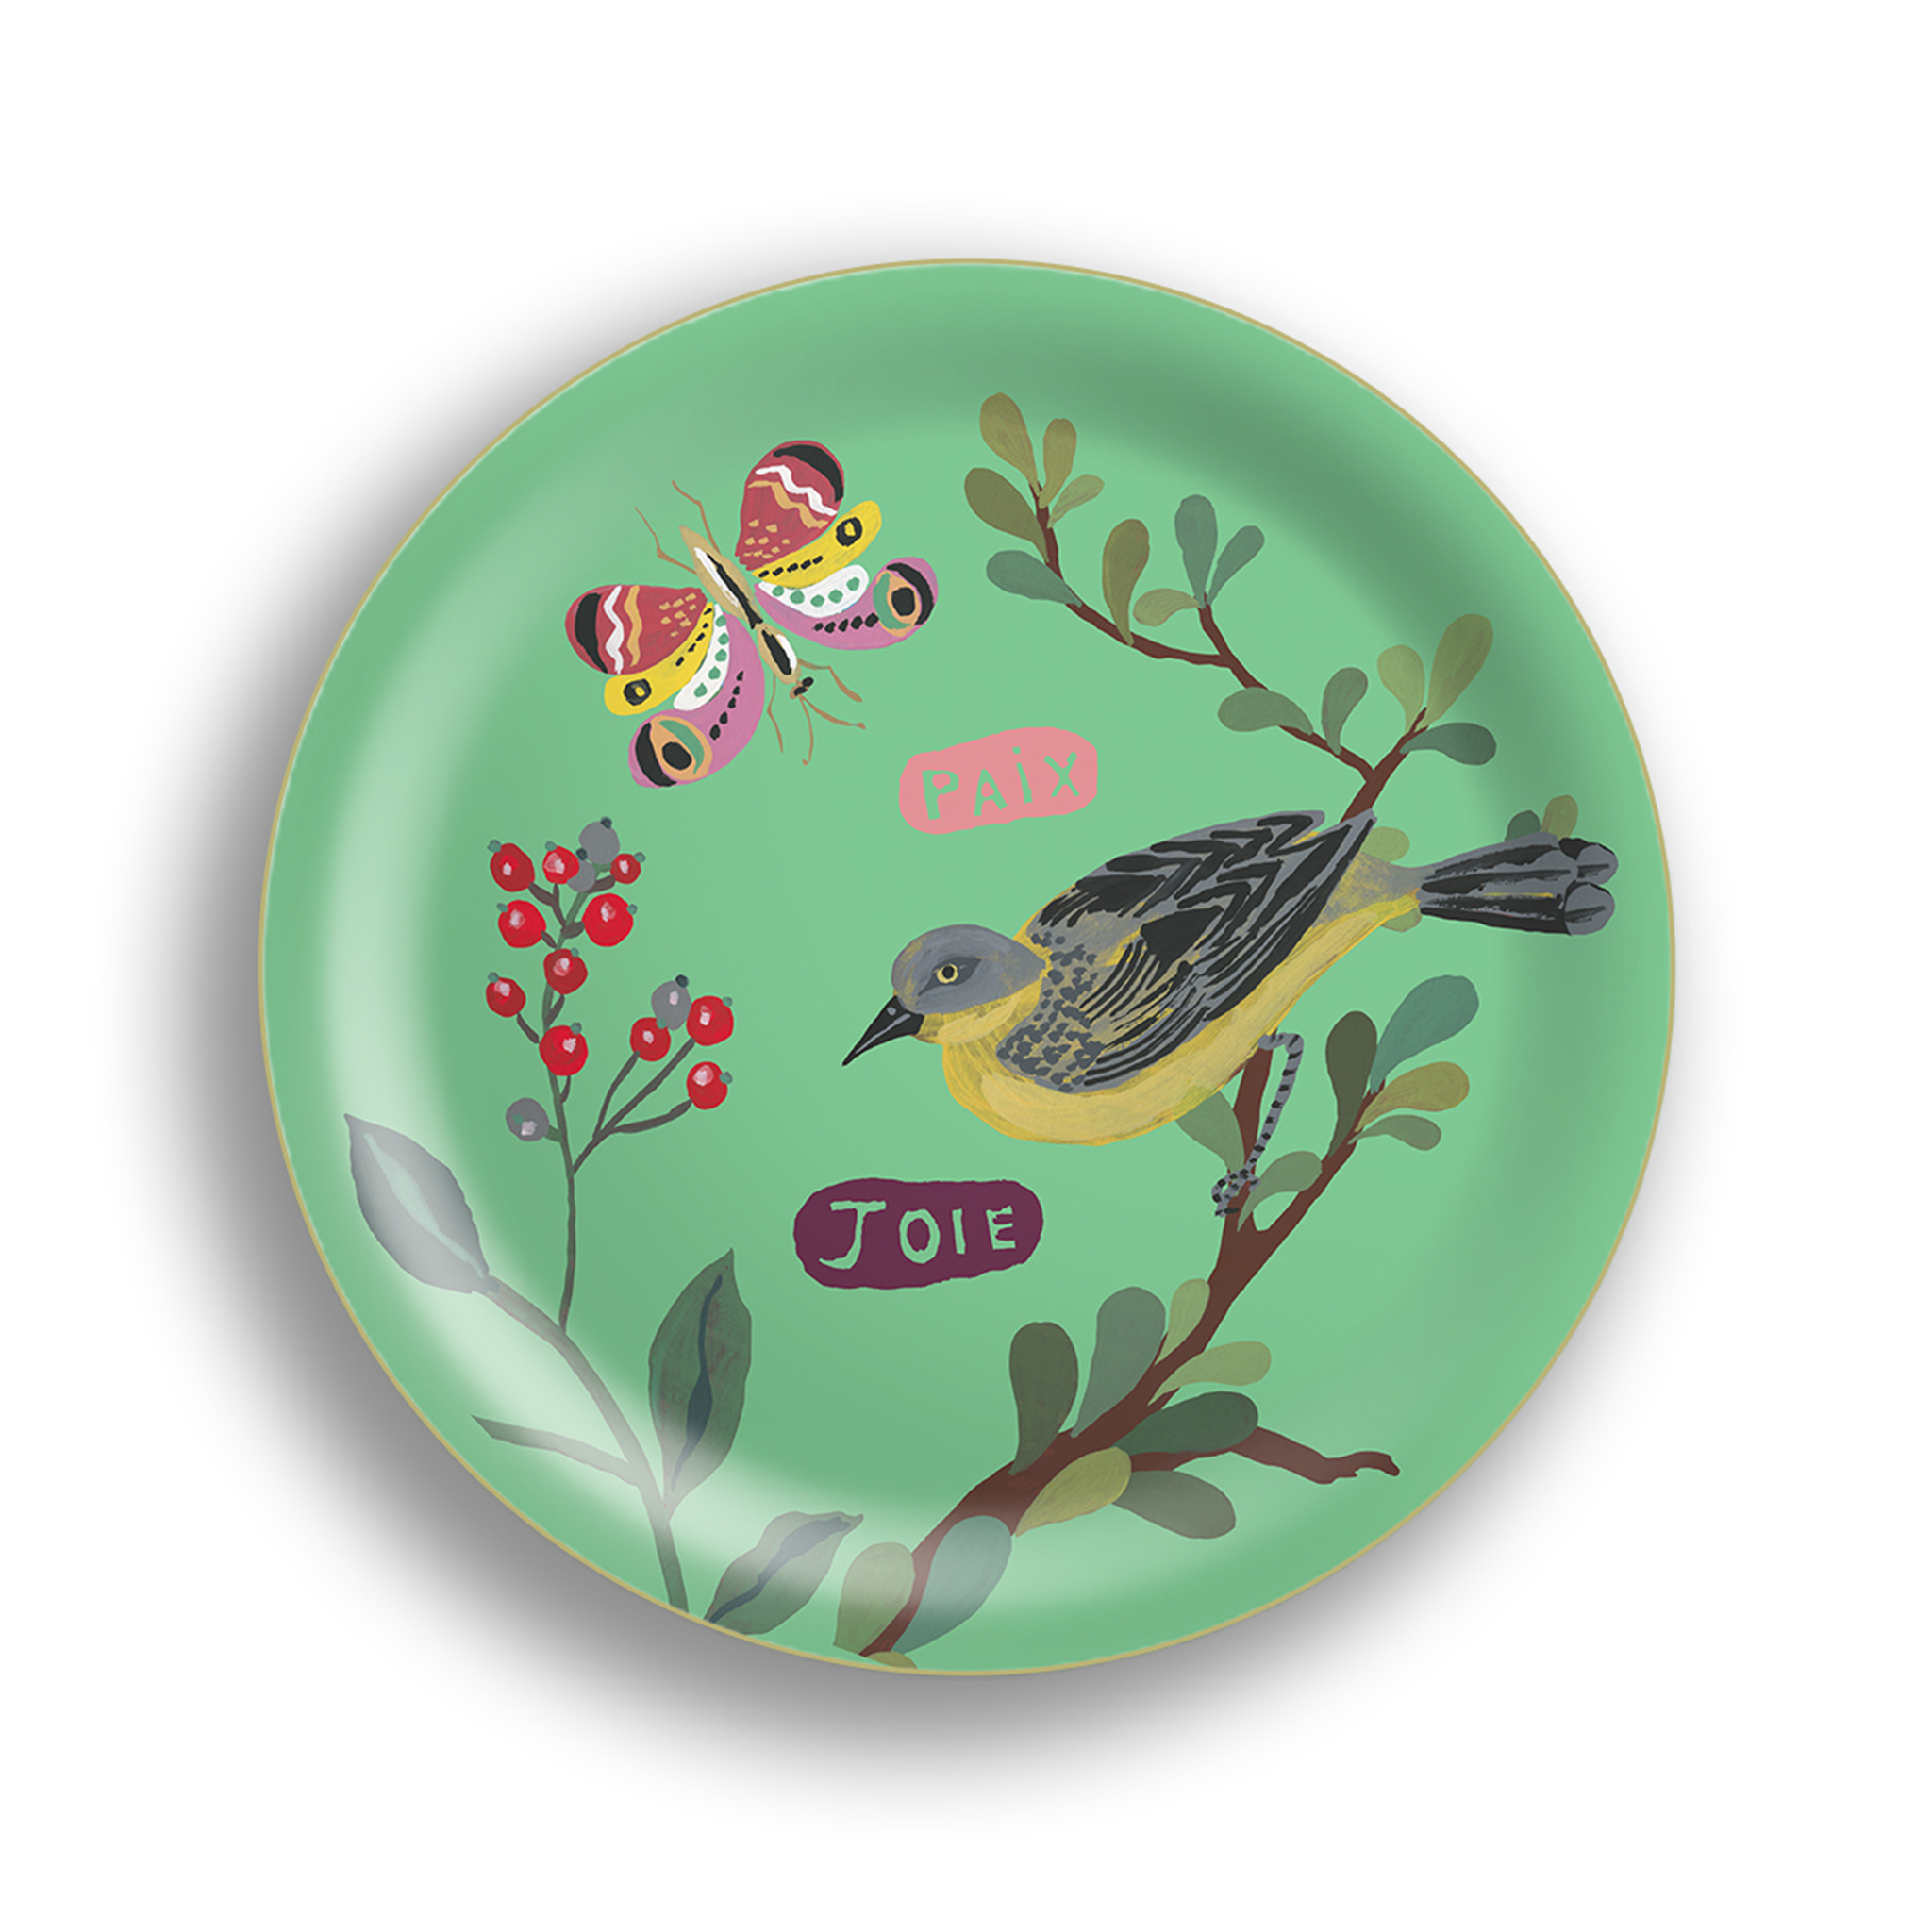 a circular green tray with a stylized yellow and black bird on a branch, red berries, and leaves. Two French words, "PAIX" (peace) and "Joie" (joy), are written in pink and purple, respectively. A colorful butterfly is also present, complementing the tray's design